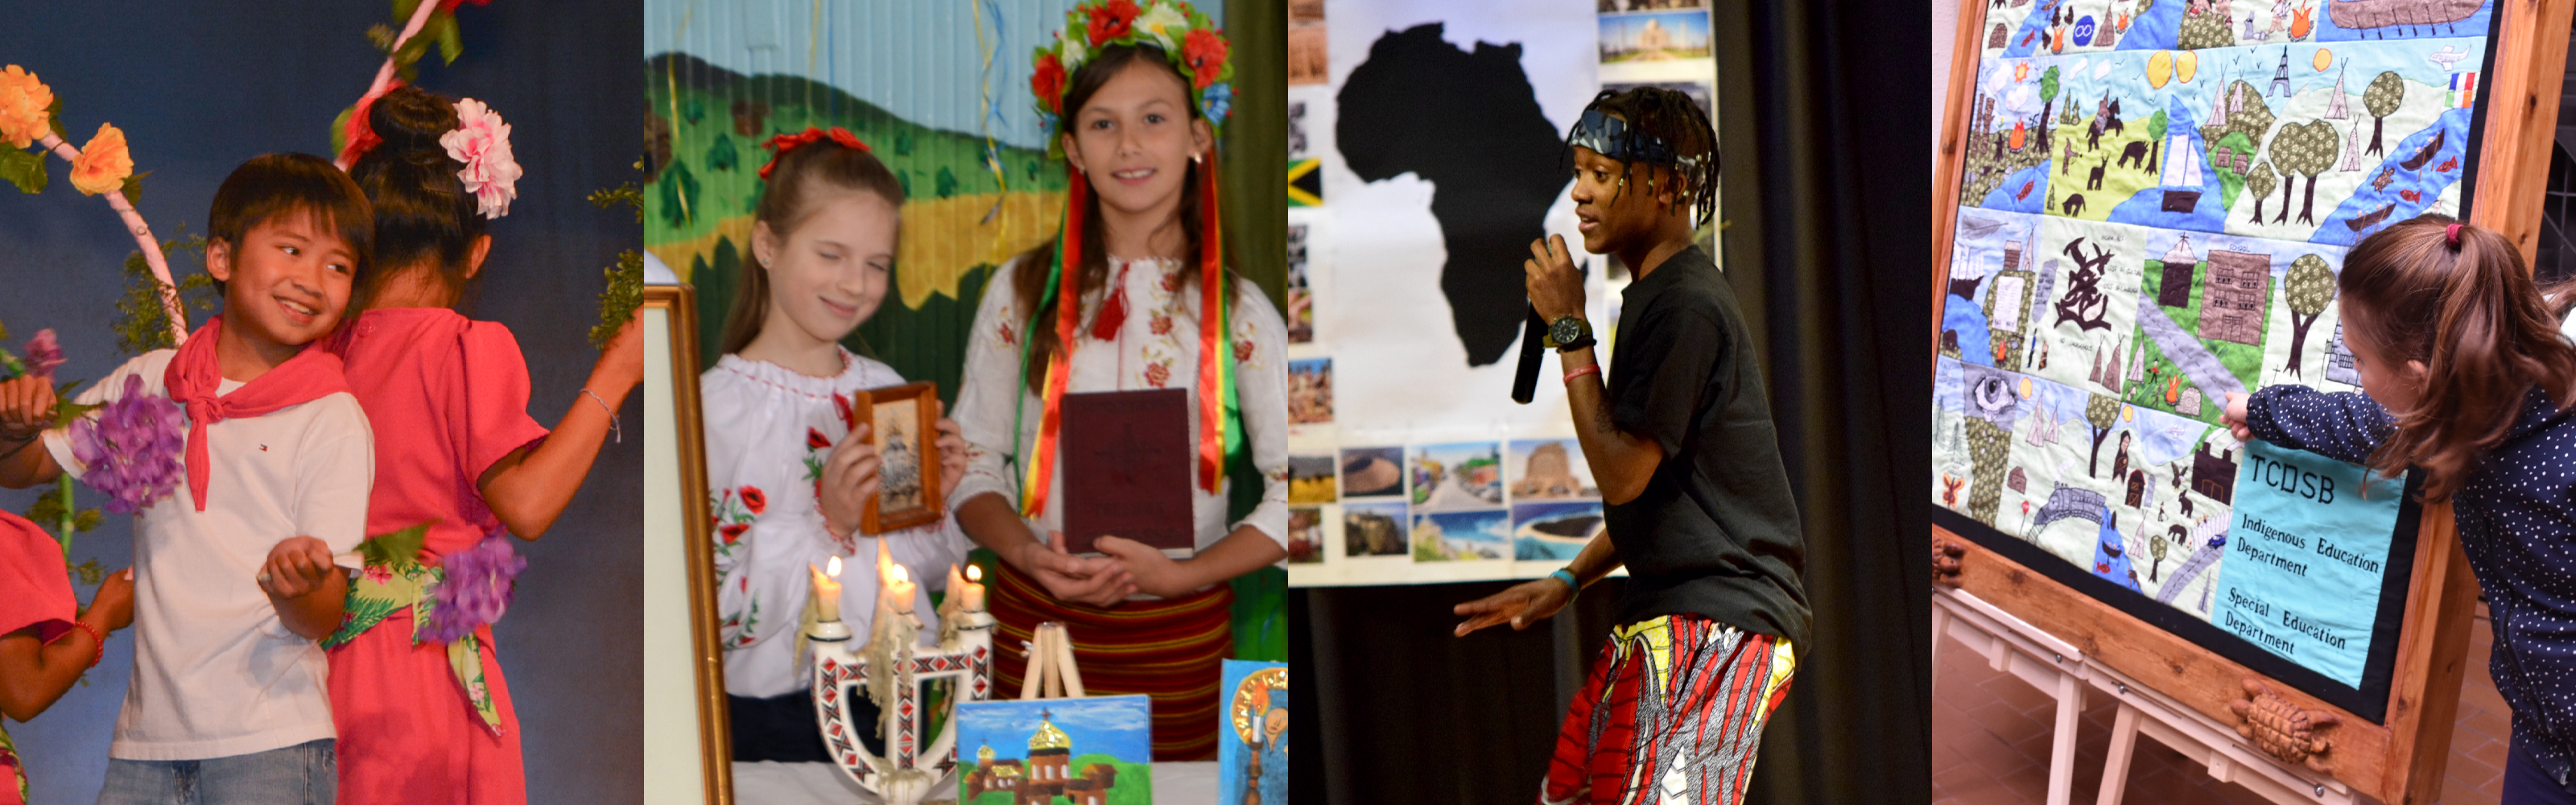 An image consists of 4 pictures. The first picture shows 2 students dancing. The second picture shows 2 female students celebrating heritage month. The third picture shows a male student singing on stagae. The forth picture shows a student showcasing her artwork.